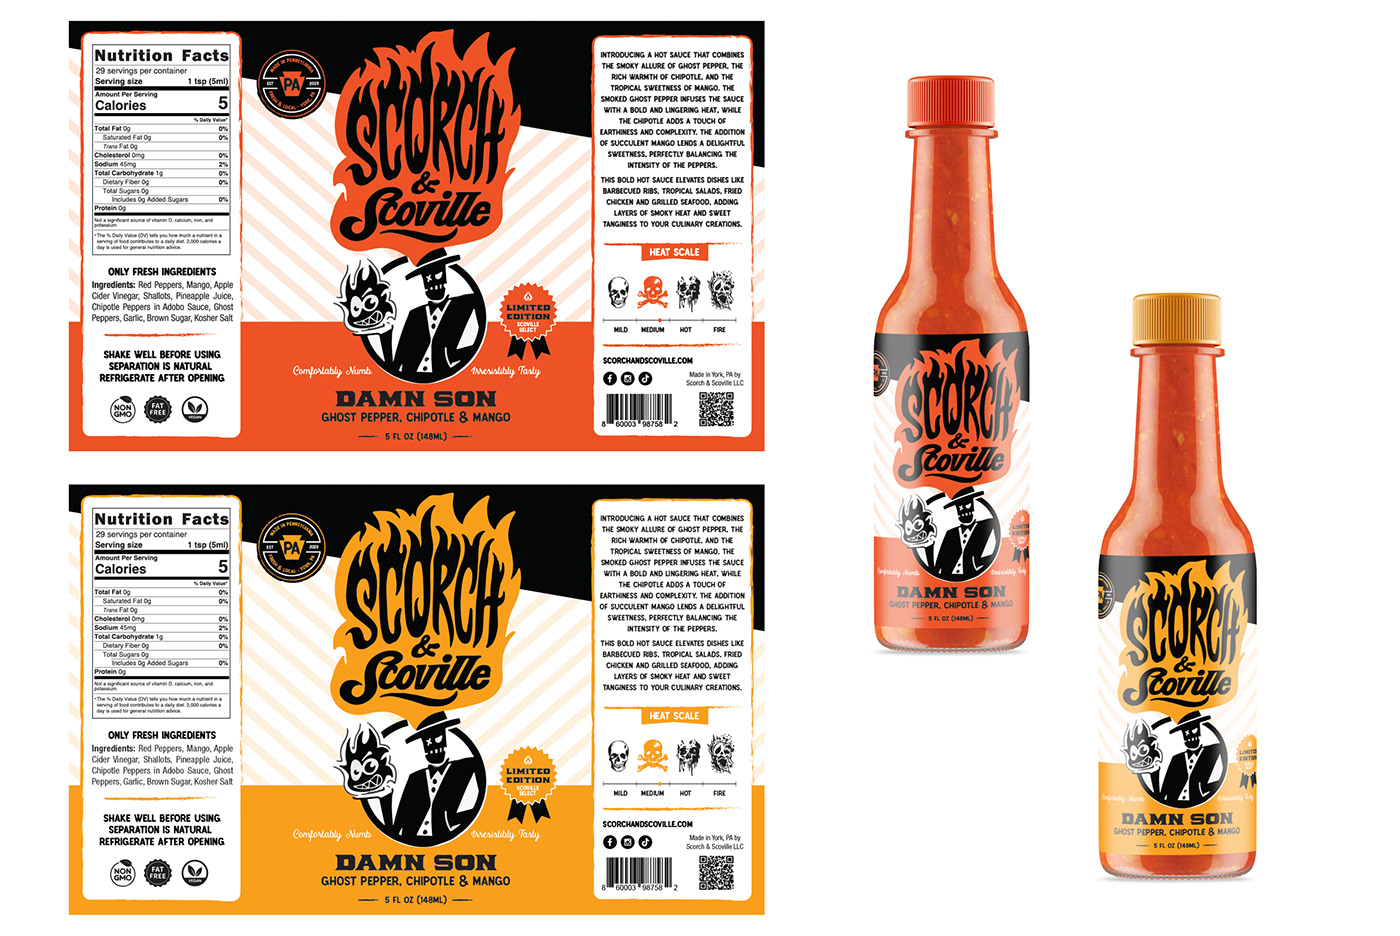 Hot sauce label design with custom wordmark as the logo for Scorch & Scoville. 